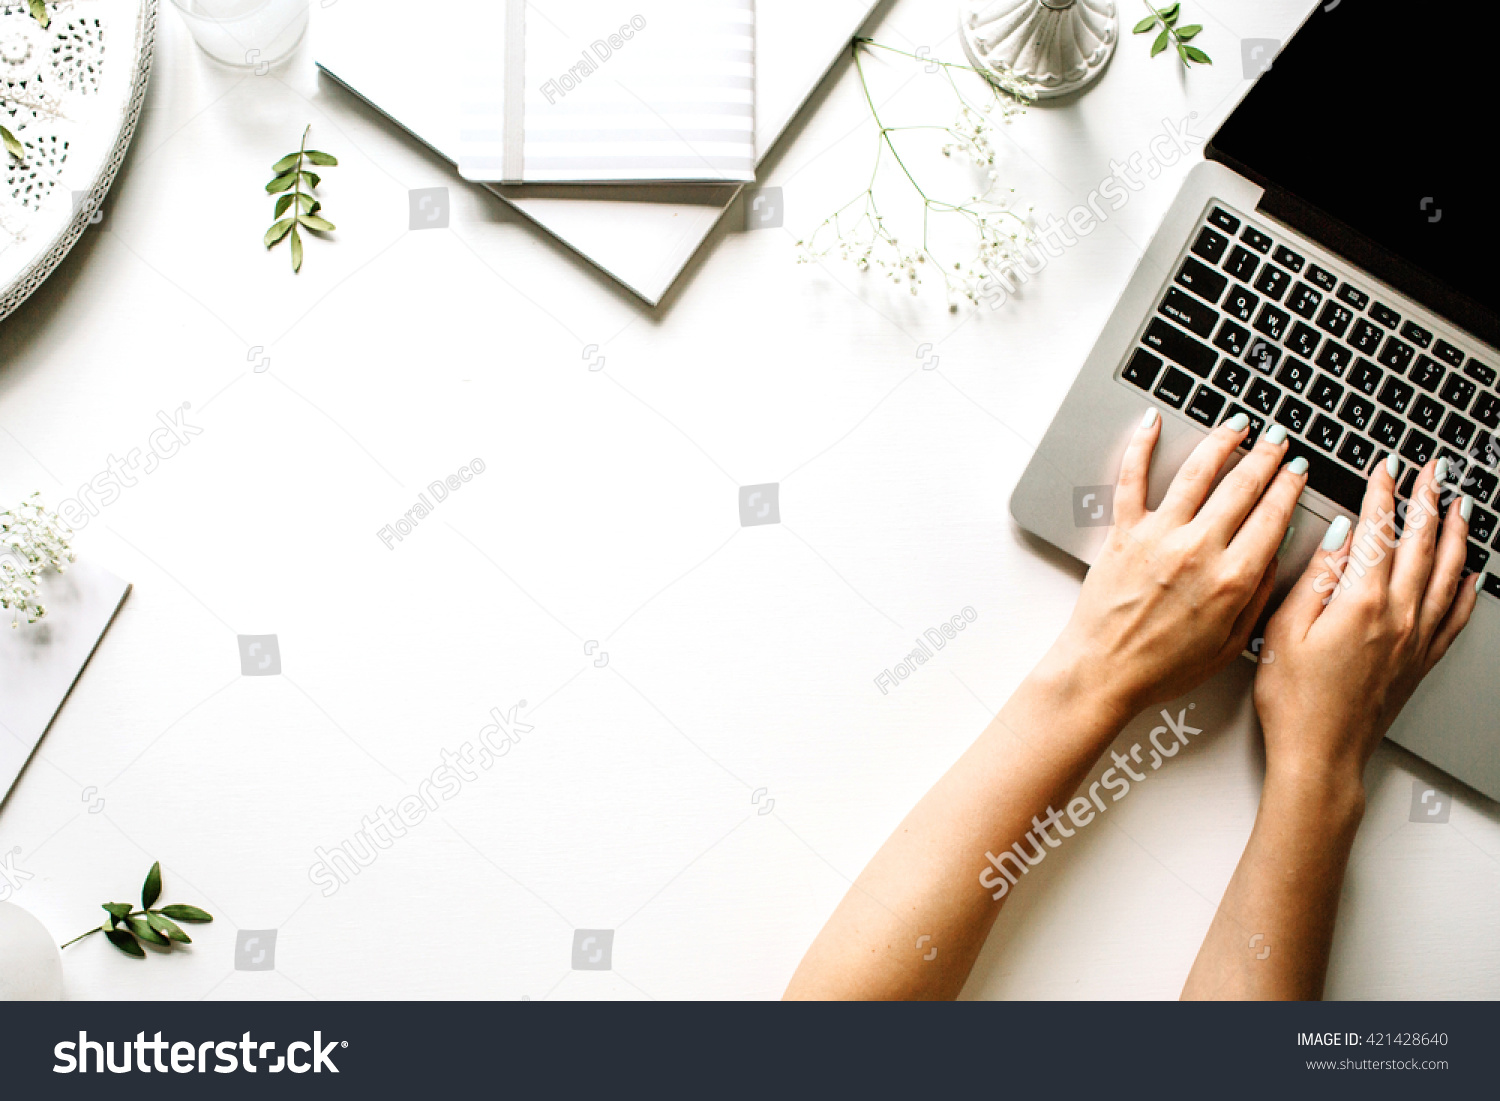 Workspace with laptop, girl's hands, notebook, sketchbook, white vintage tray, candlesticks on white background. Flat lay, top view office table desk. Freelancer working place #421428640